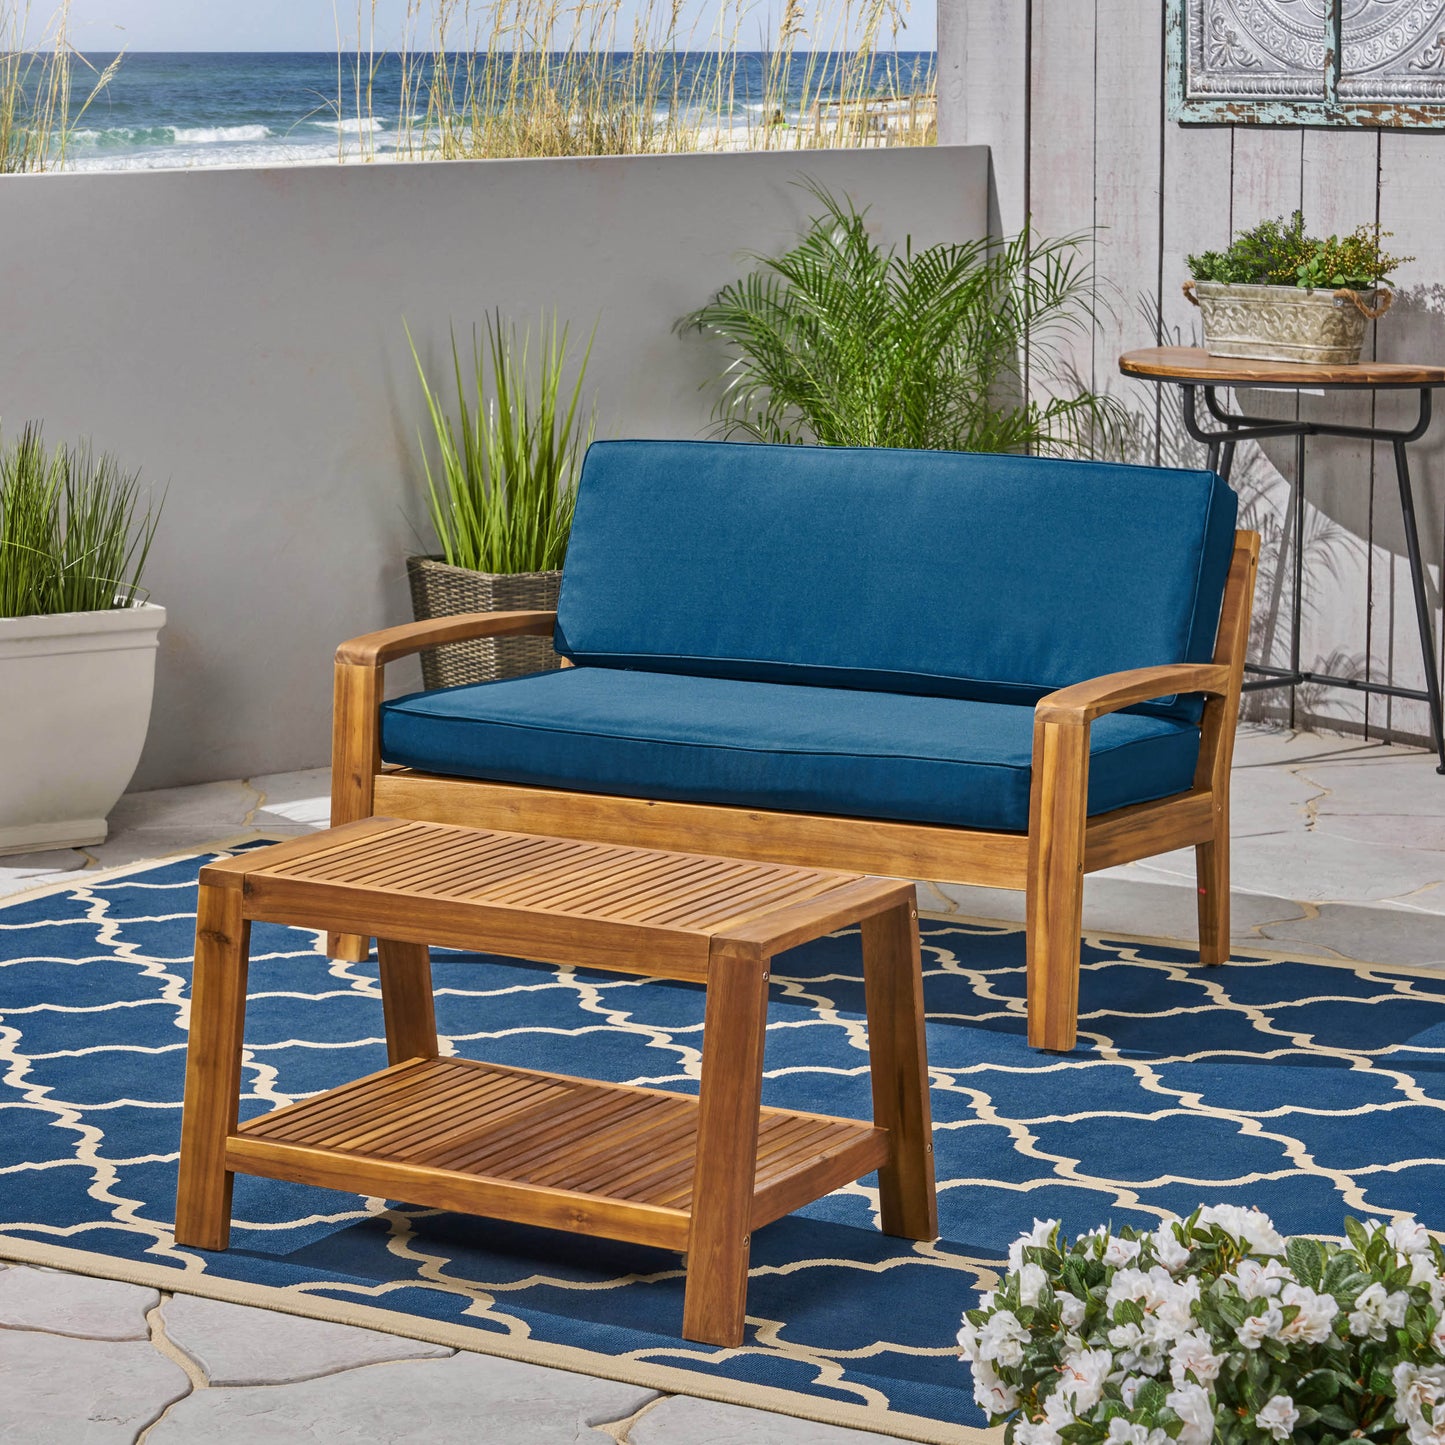 Parma Outdoor Acacia Wood Loveseat and Coffee Table Set with Cushions